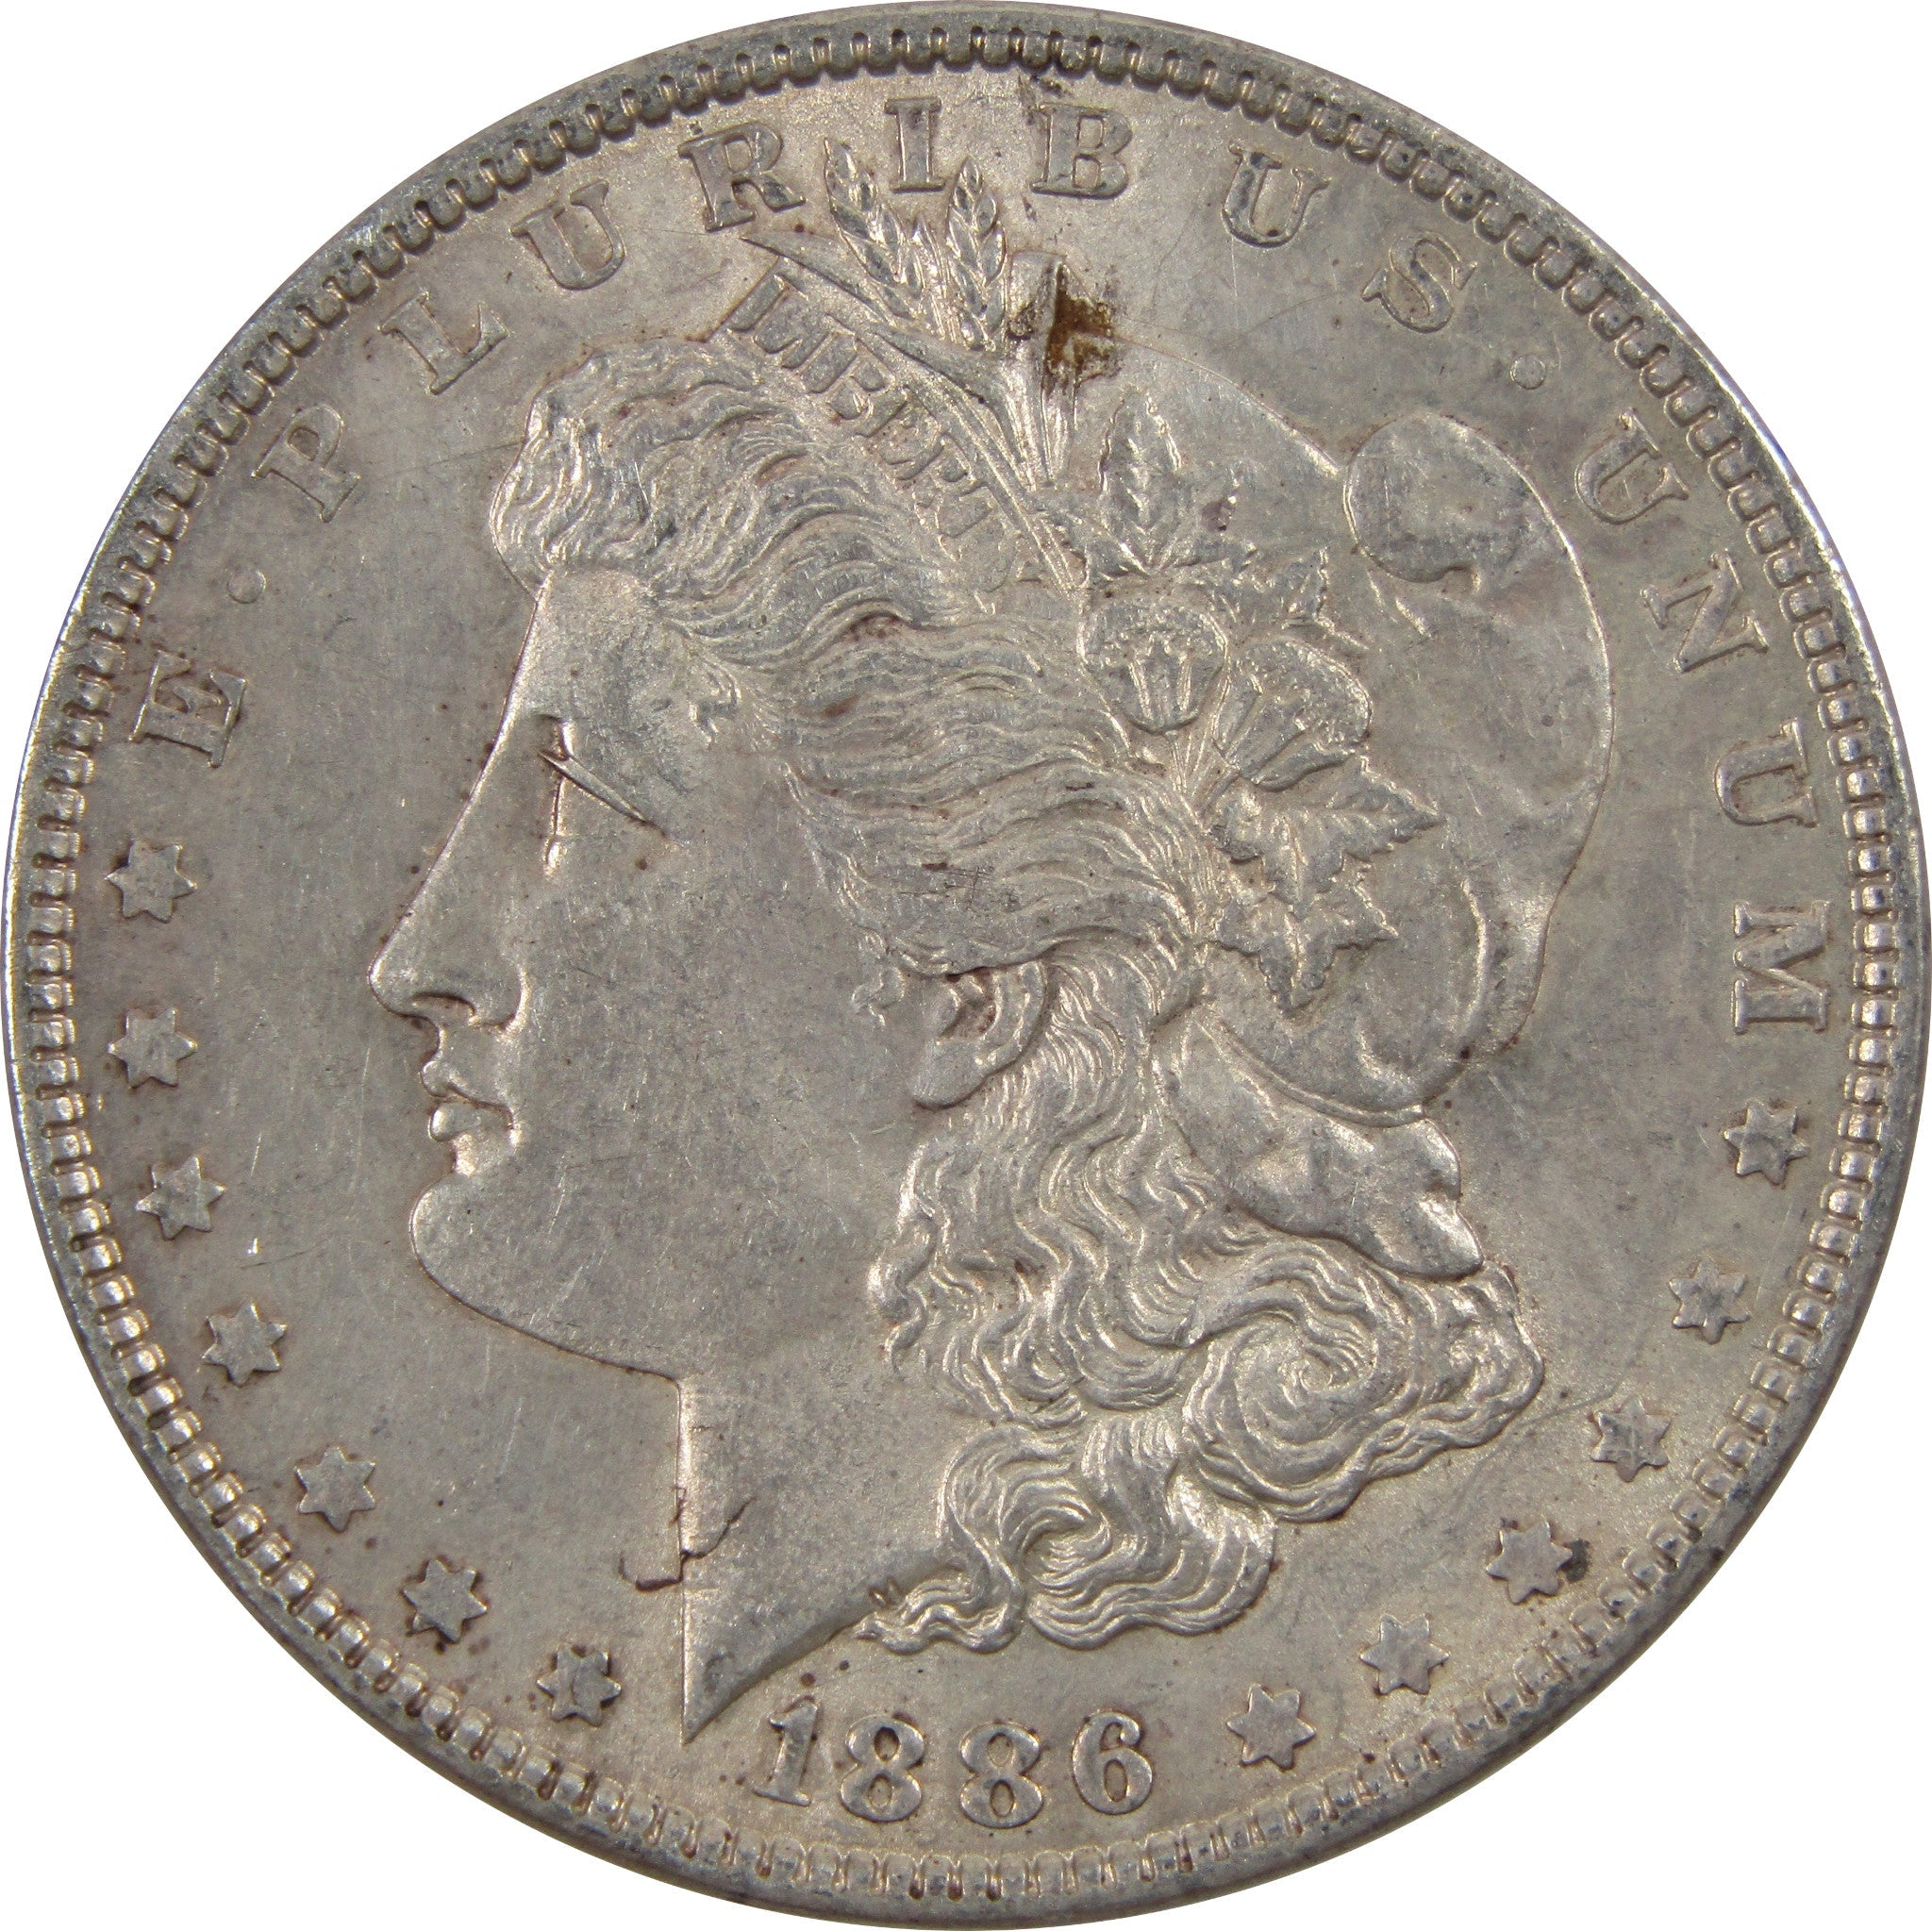 1886 Morgan Dollar AU About Uncirculated 90% Silver $1 Coin SKU:I5487 - Morgan coin - Morgan silver dollar - Morgan silver dollar for sale - Profile Coins &amp; Collectibles